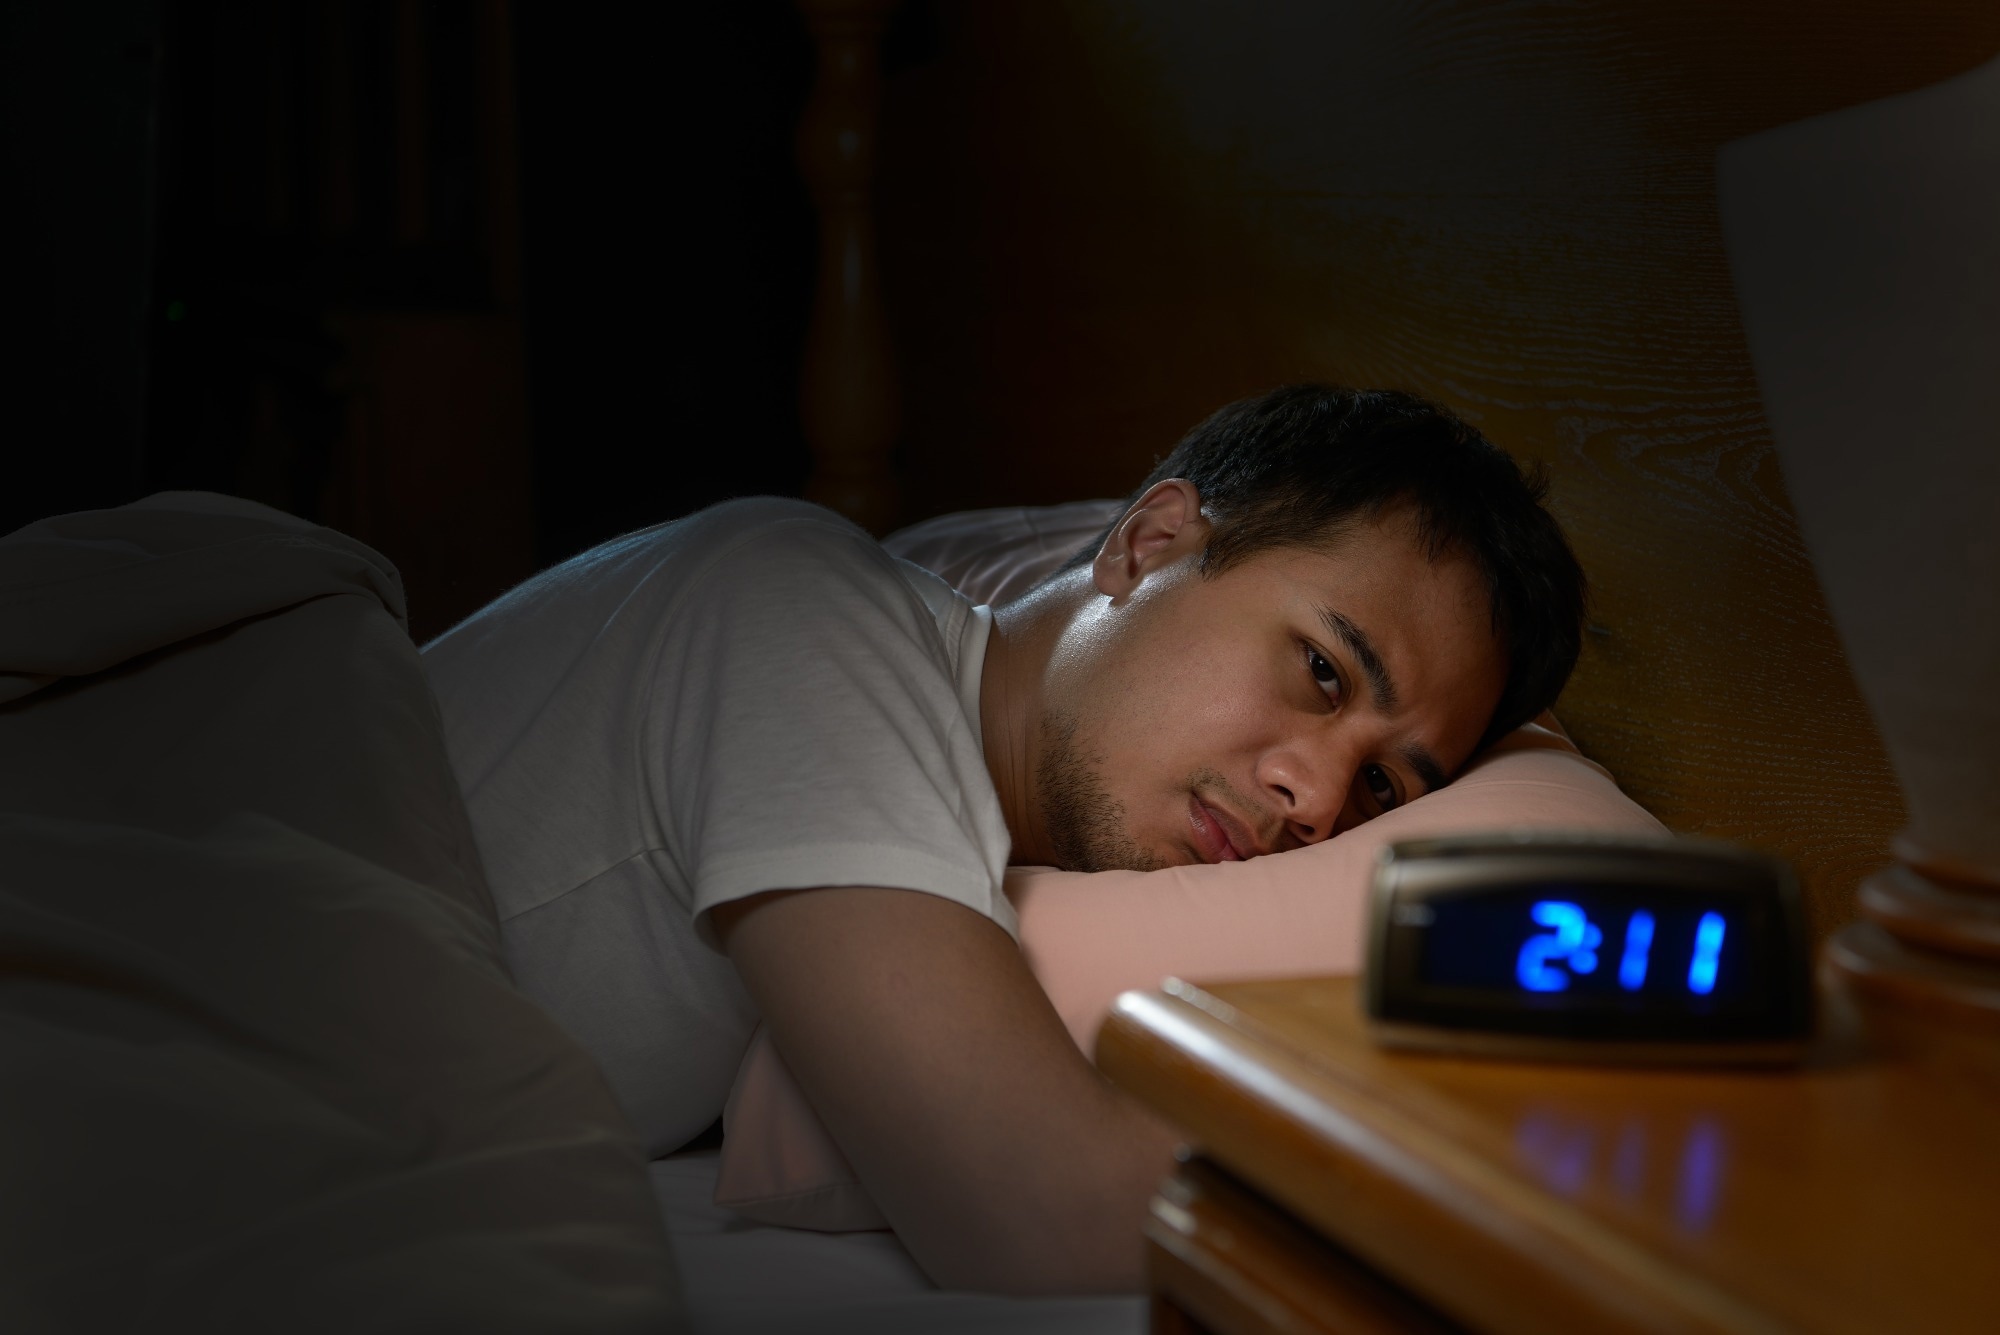 Study: Sleep Patterns and the Risk of Acute Stroke: Results from the INTERSTROKE International Case-Control Study. Image Credit: amenic181 / Shutterstock